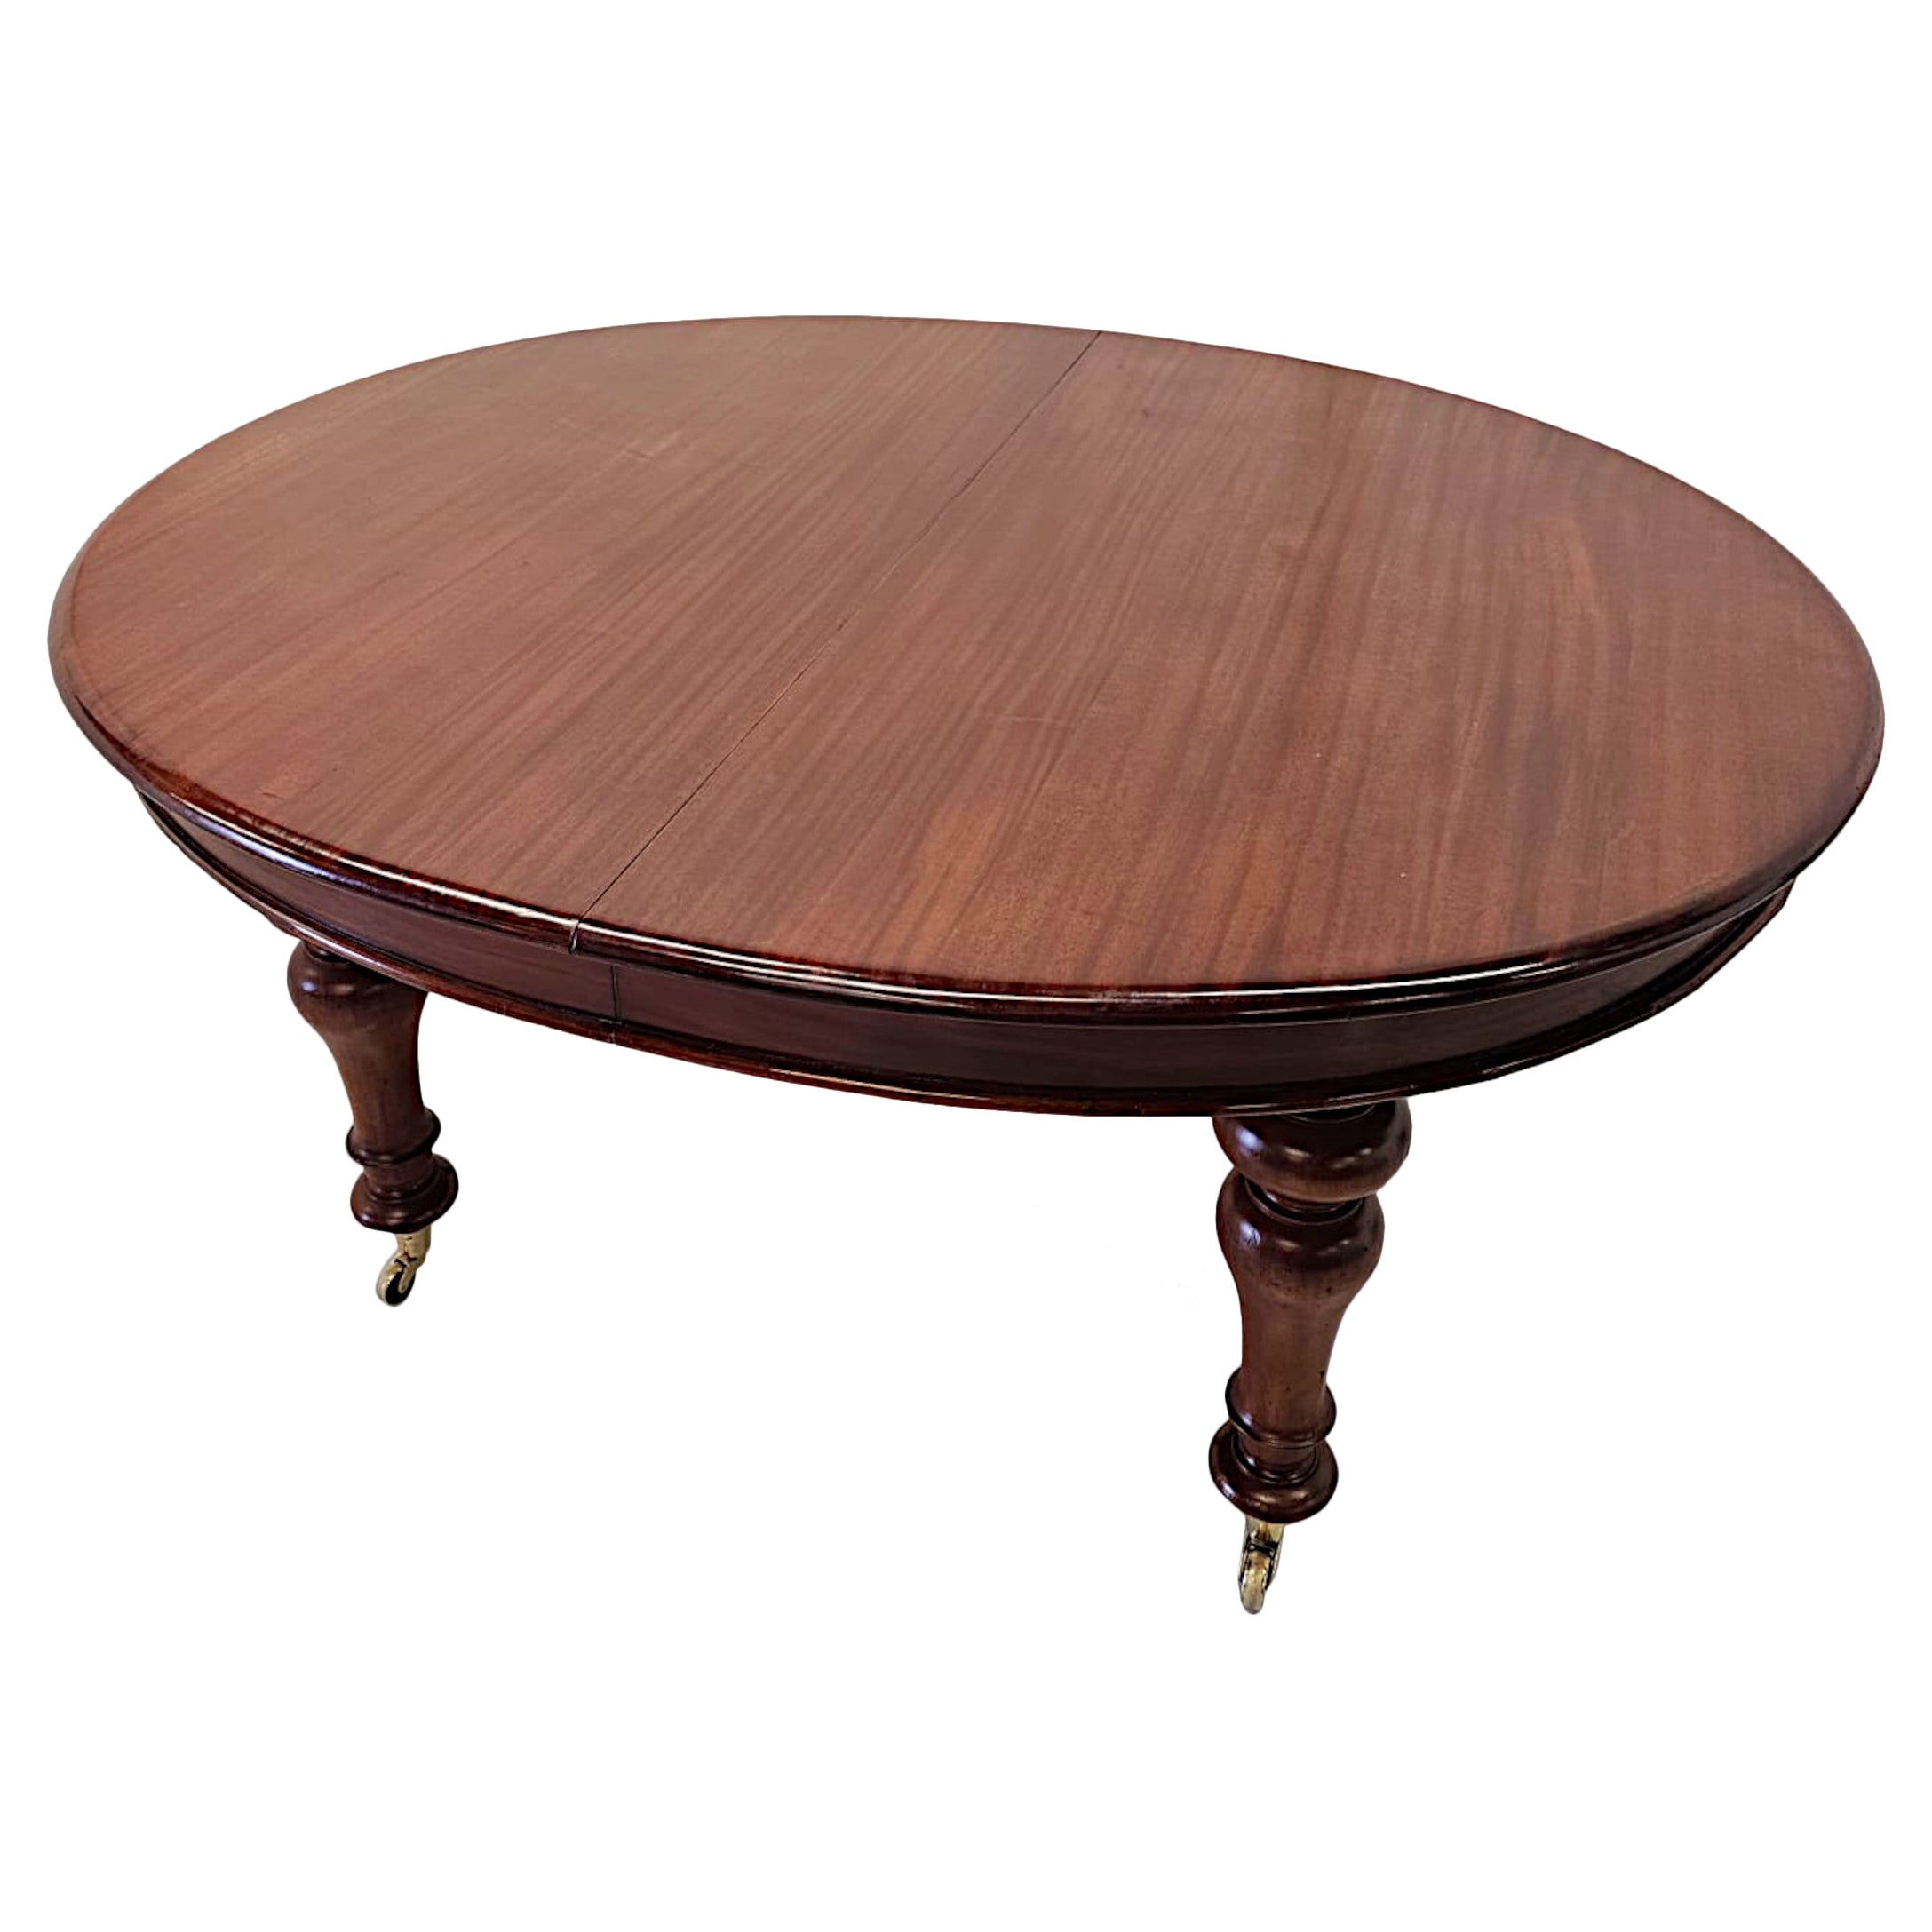 A Gorgeous 19th Century D-End Mahogany Dining Table after Strahan